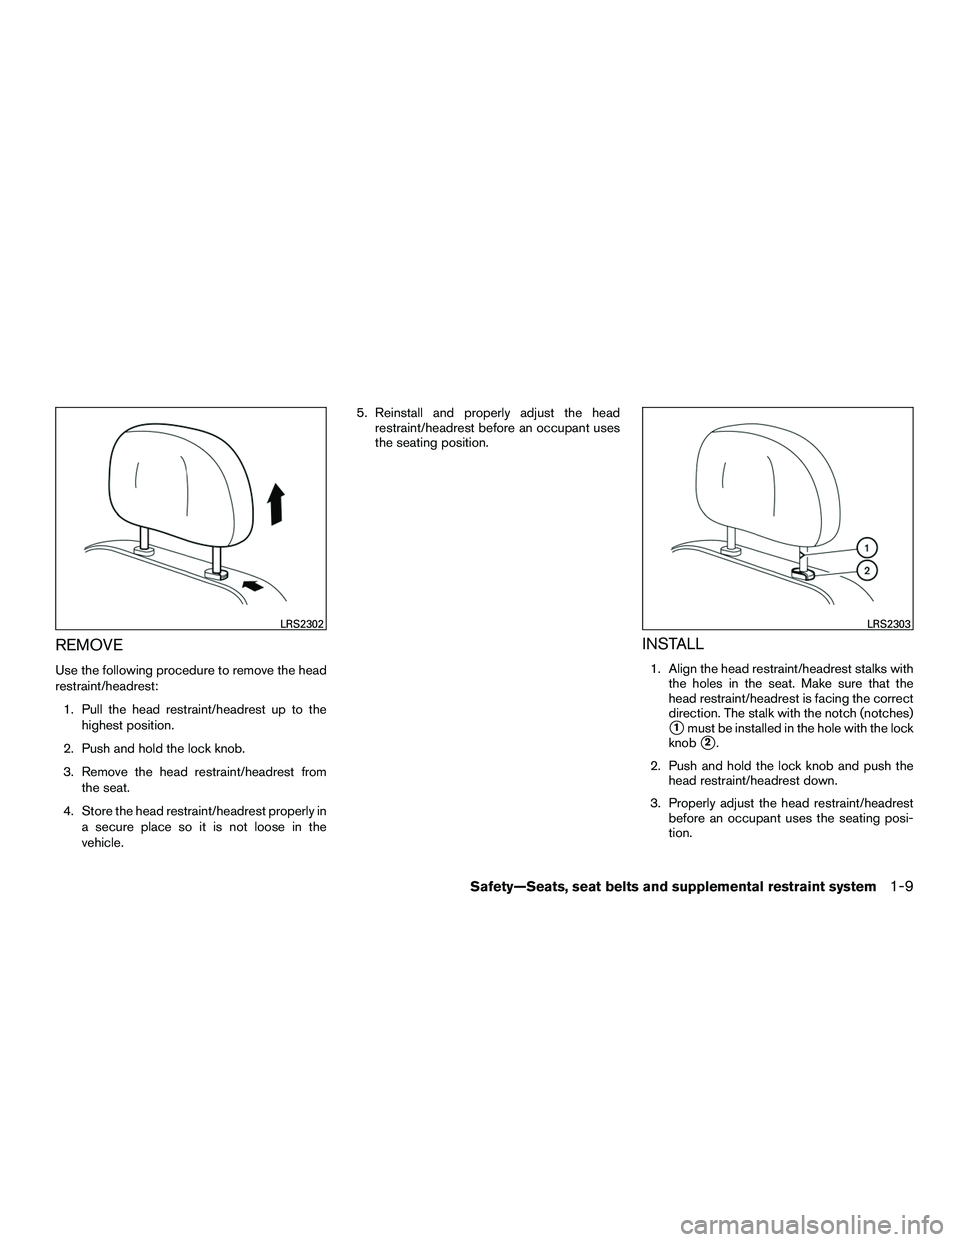 NISSAN NV200 2016 Owners Manual REMOVE
Use the following procedure to remove the head
restraint/headrest:1. Pull the head restraint/headrest up to the highest position.
2. Push and hold the lock knob.
3. Remove the head restraint/he